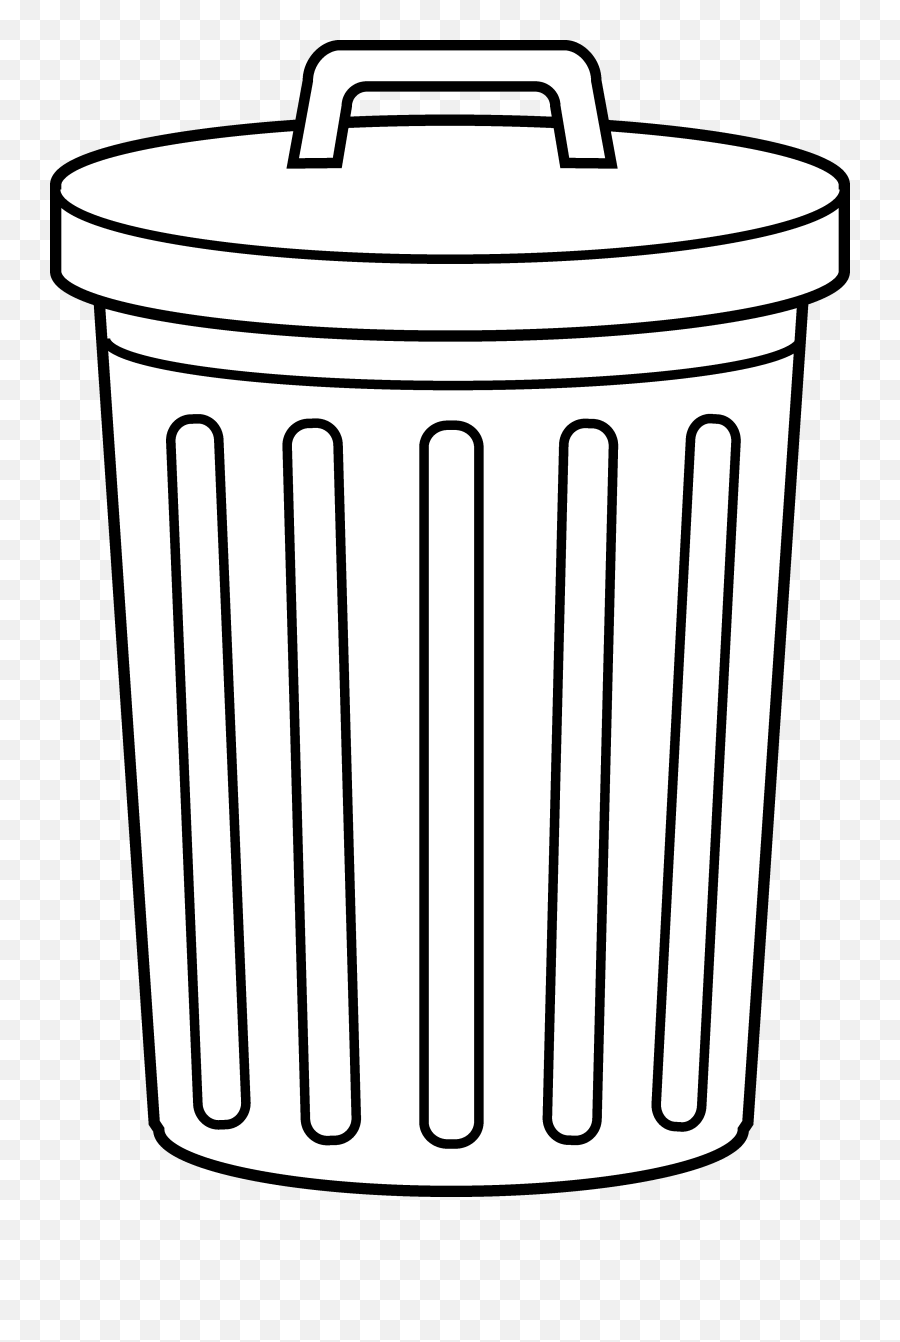 935275 Bin Clip Art - Trash Can To Color Png Download Trash Can Clipart Transparent Emoji,Trash Can Png